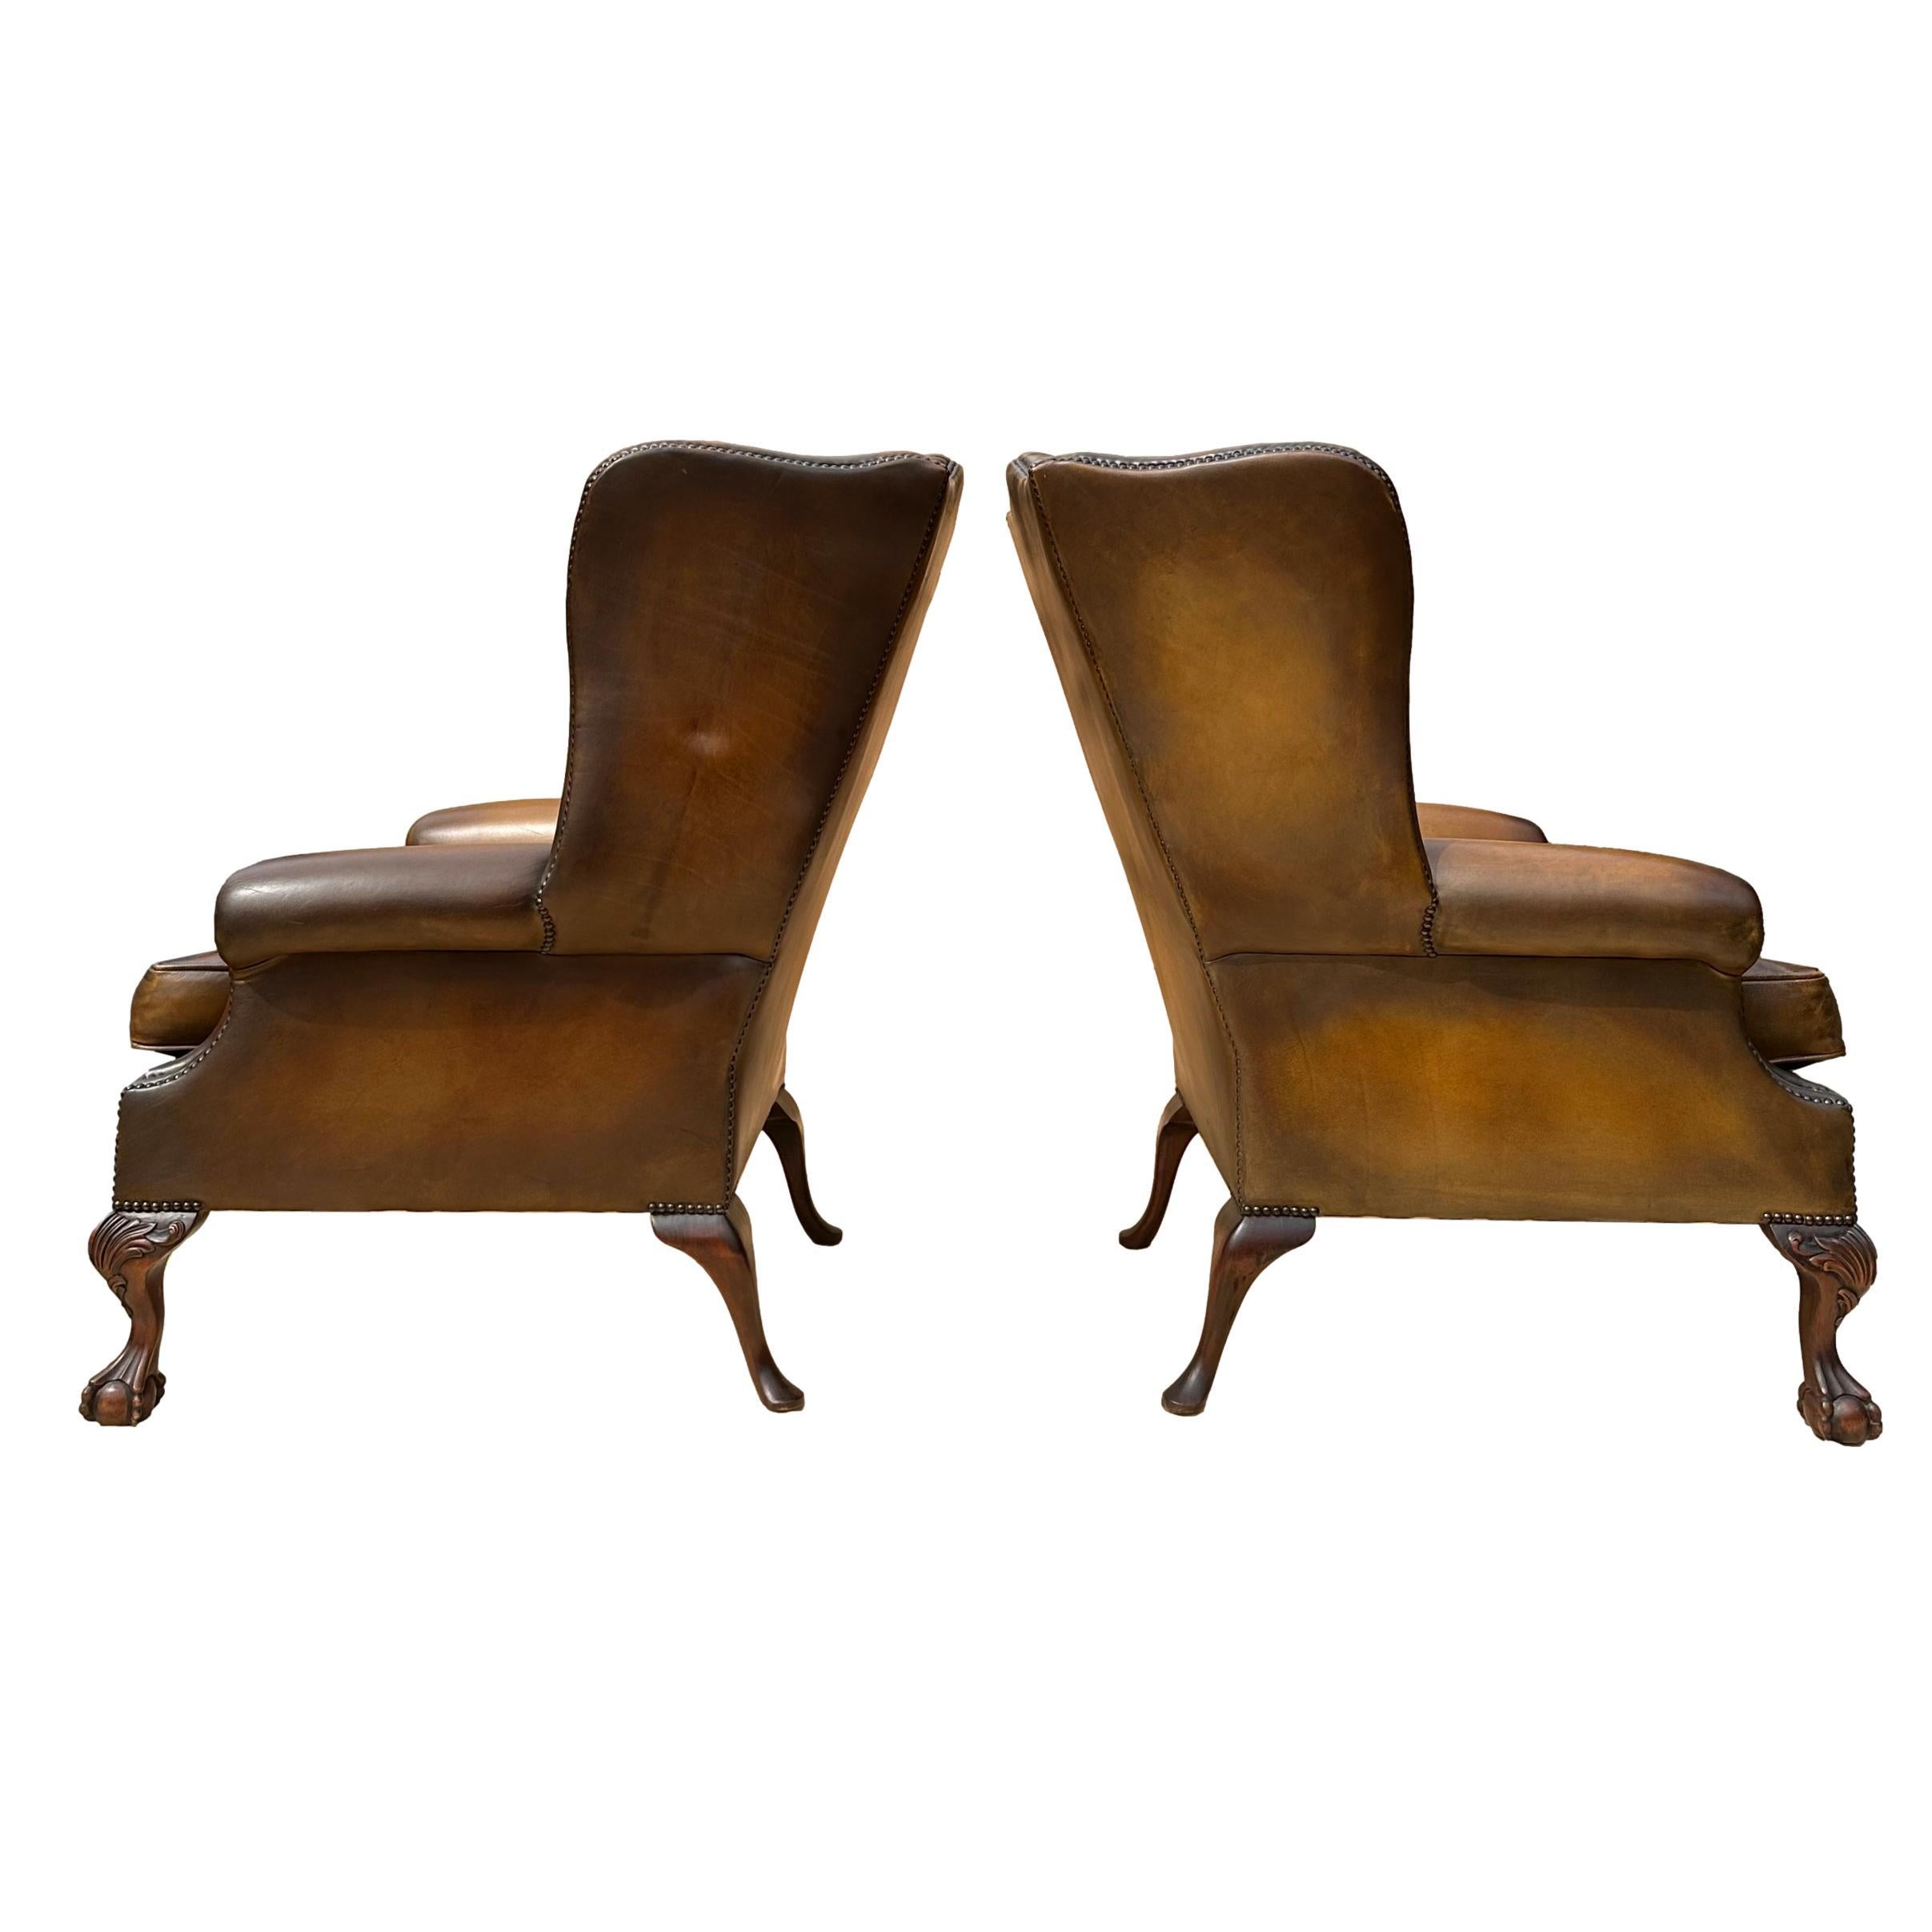 20th Century Pair of Leather Wing Back Tufted Chairs on Ball & Claw Feet, English, ca. 1920. For Sale